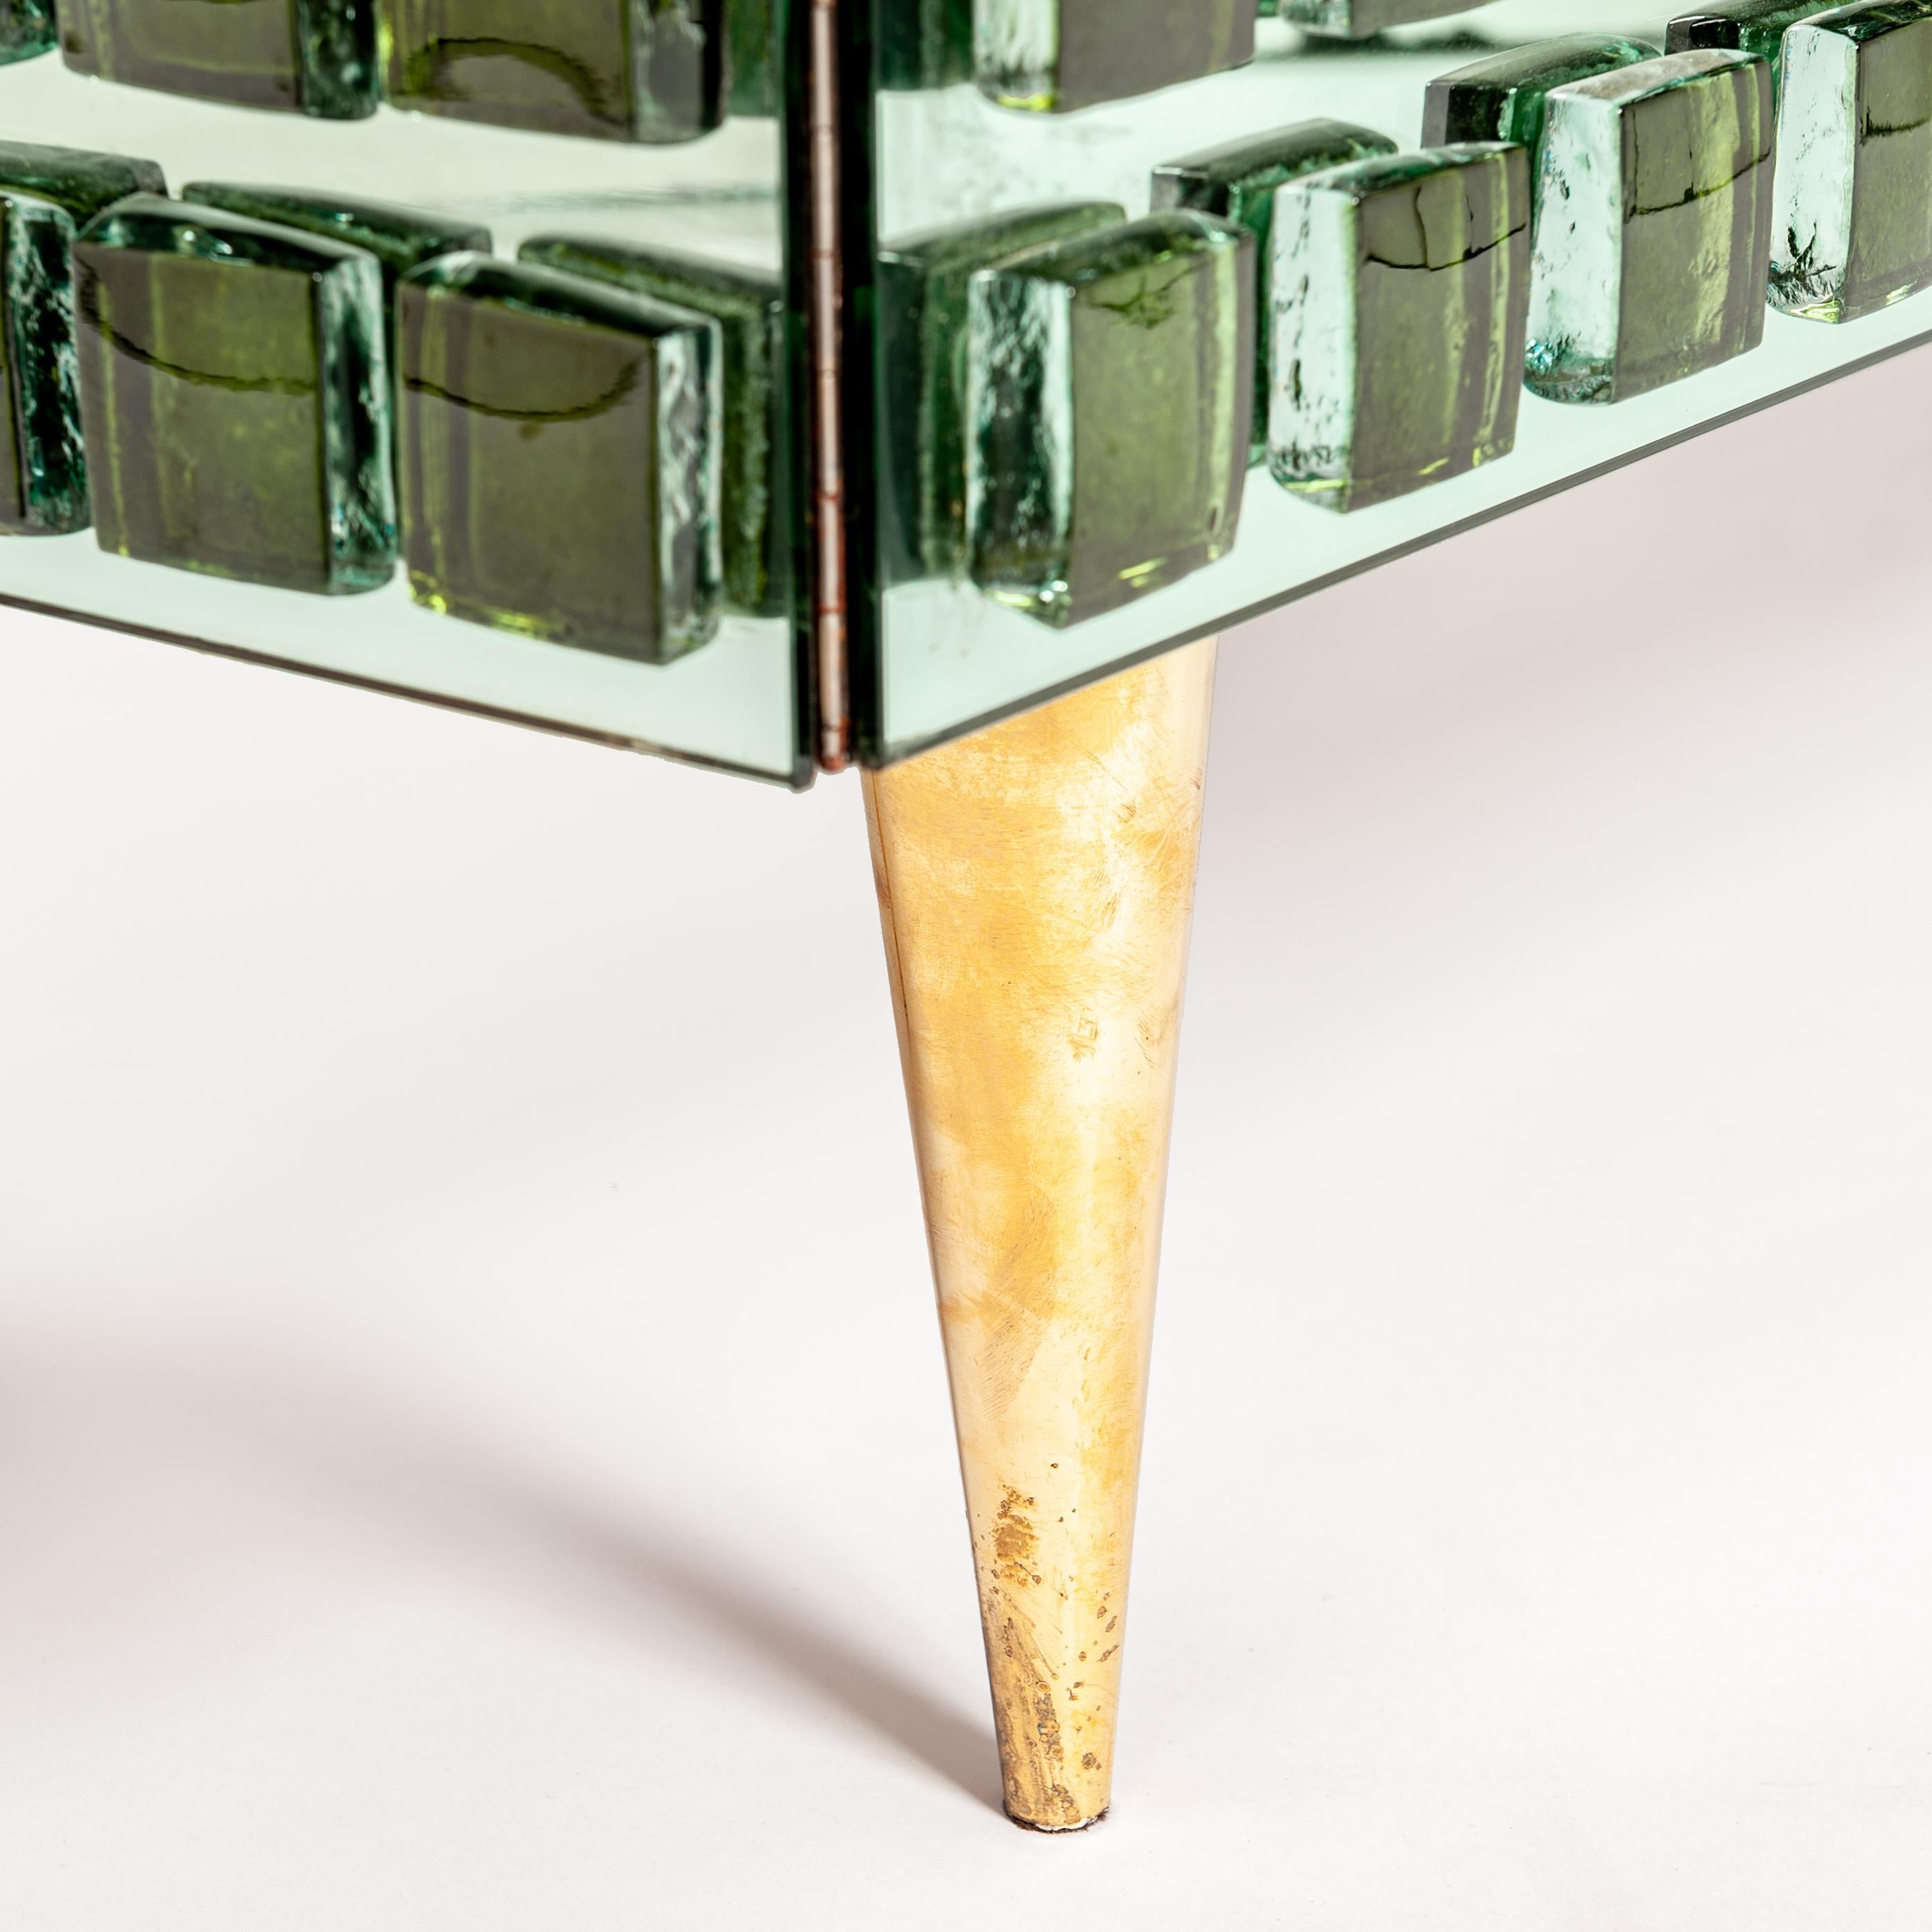 Italian Studio Made Mirrored Sideboard Emerald Green Hand Cast Opal Glass Stones For Sale 2